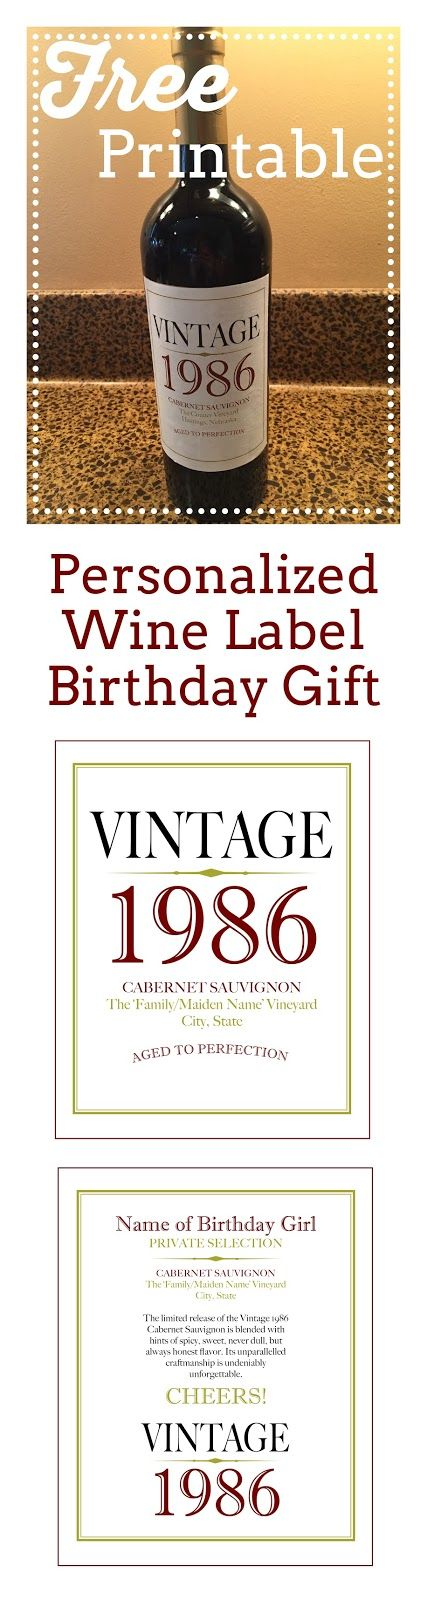 Free Printable For Personalized Wine Label Birthday Gift Wine Label 